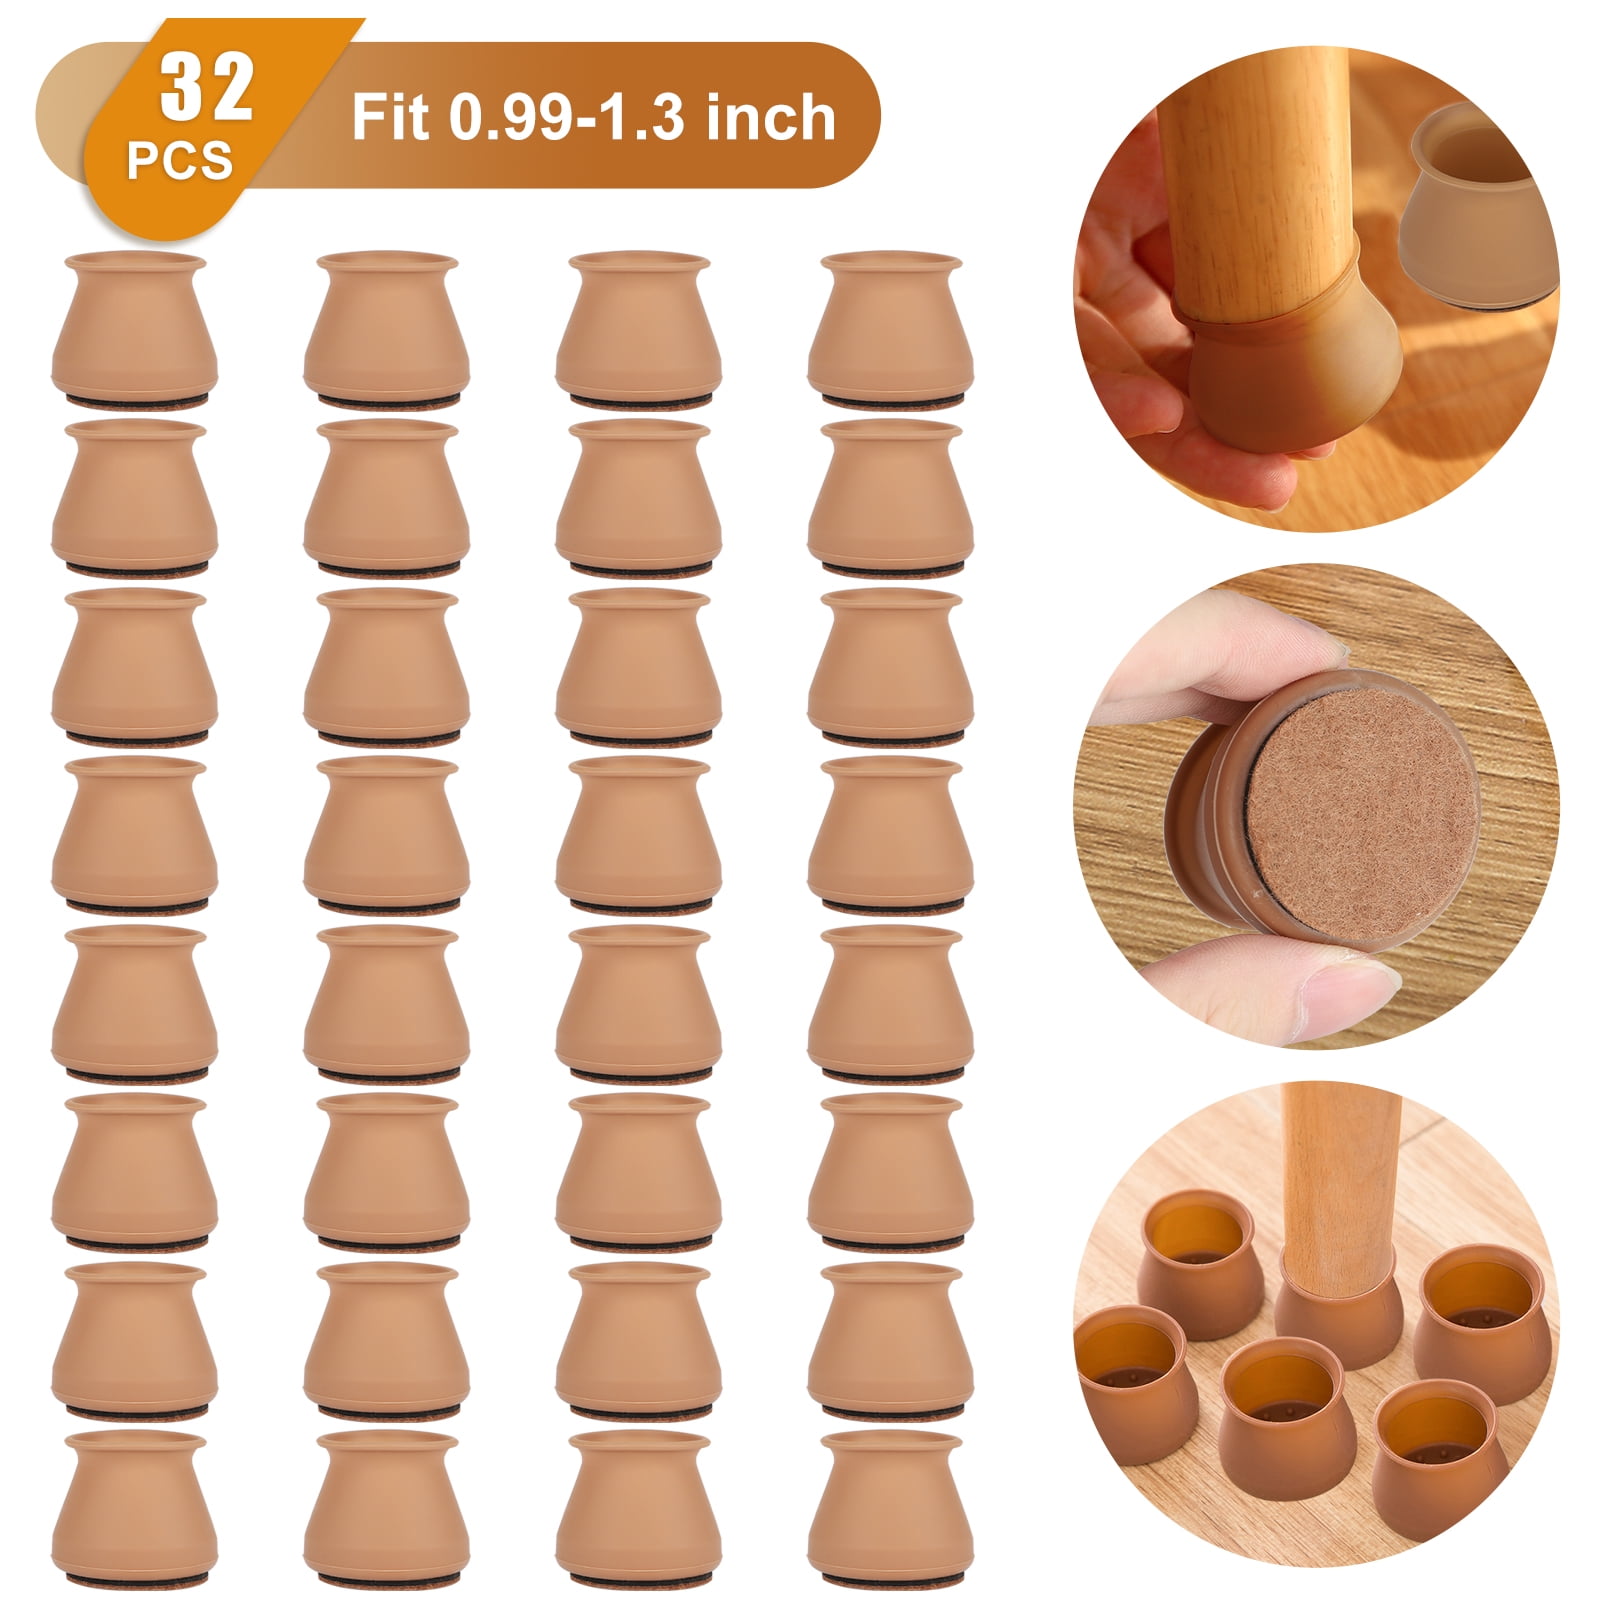 Round Silicone Chair Leg Caps Table Cover Feet Pads Floor Protectors Y0K8 